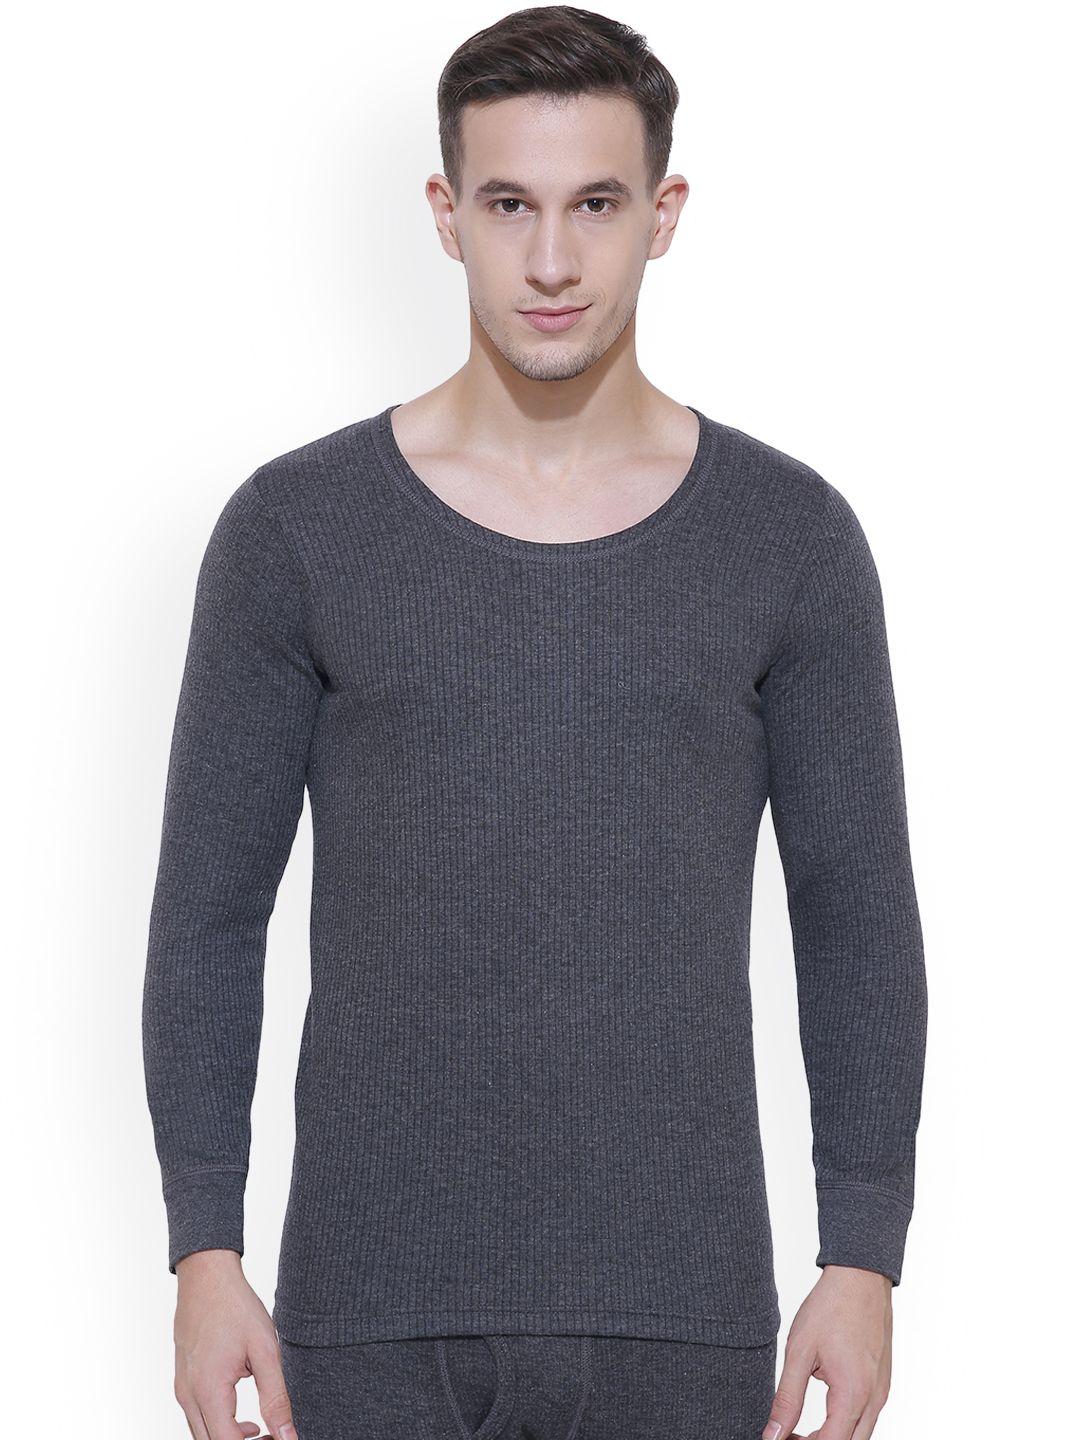 bodycare insider men charcoal grey solid thermal tops b101c_85